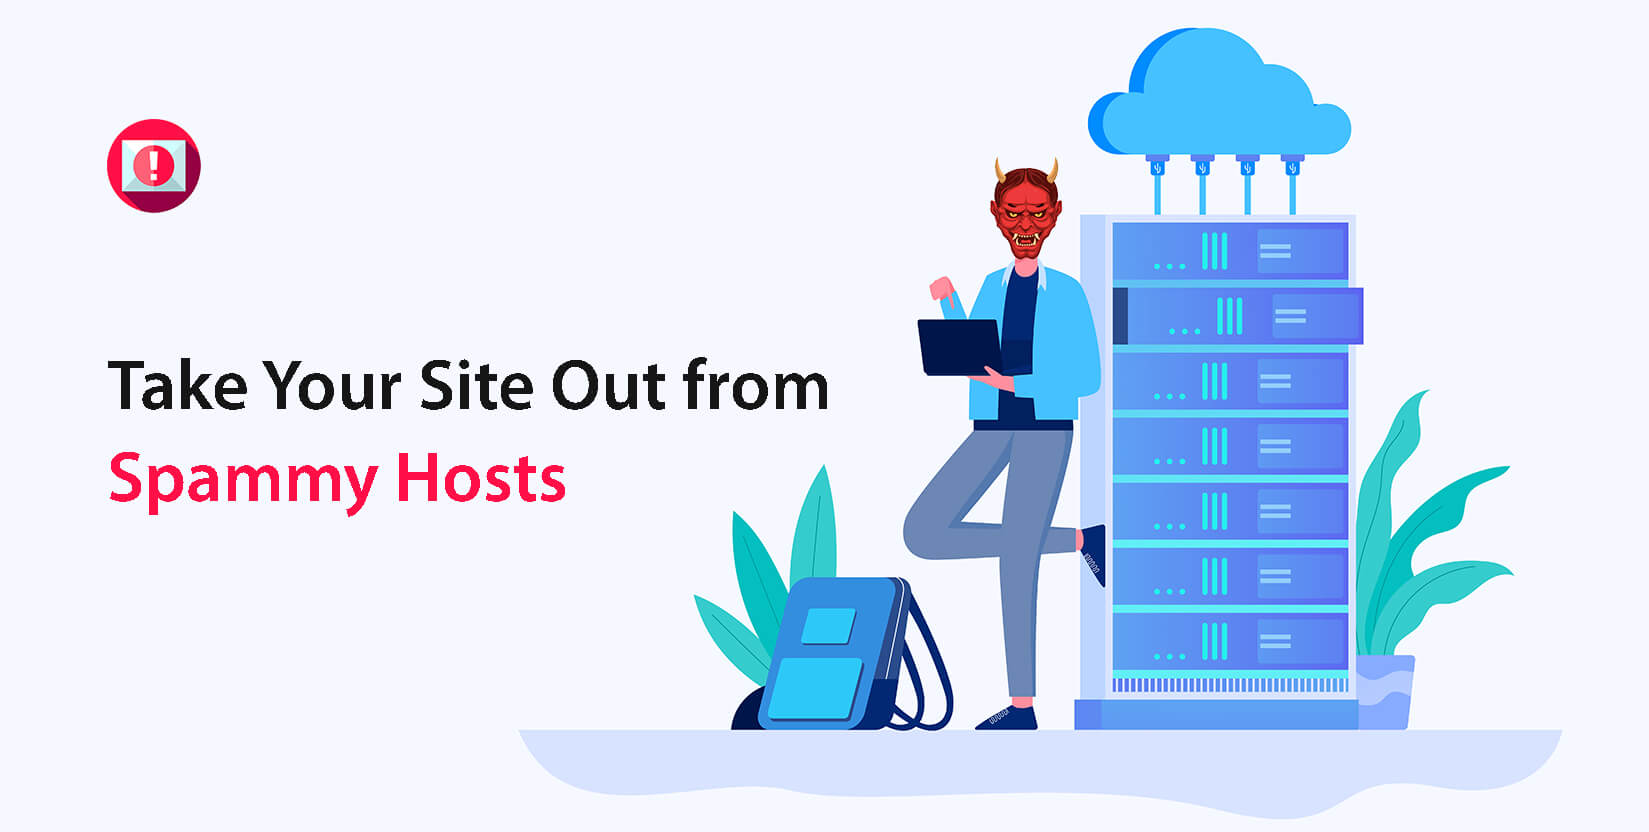 Take Your Site Out from Spammy Hosts